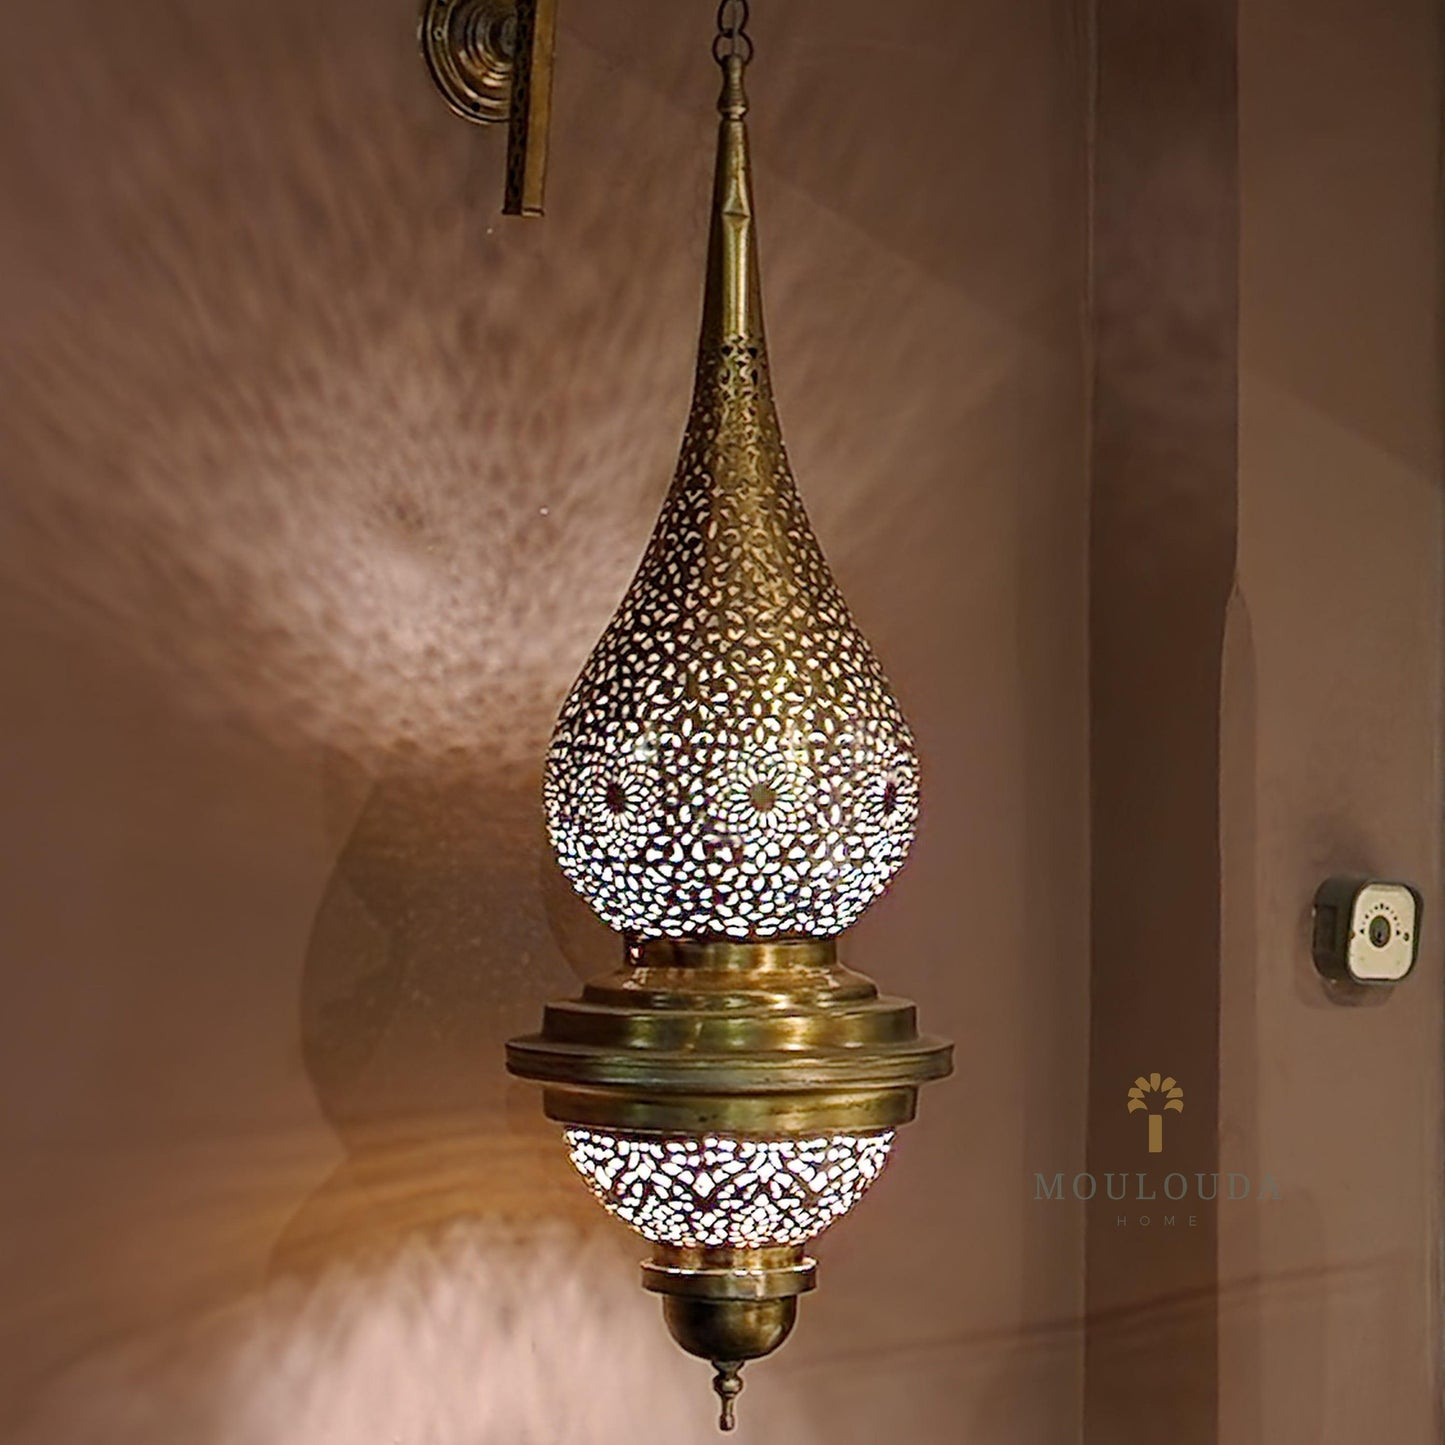 Art Wall Sconce - Beautiful Moroccan Handmade Wall Lamp for Art Lovers - Mouloudahome